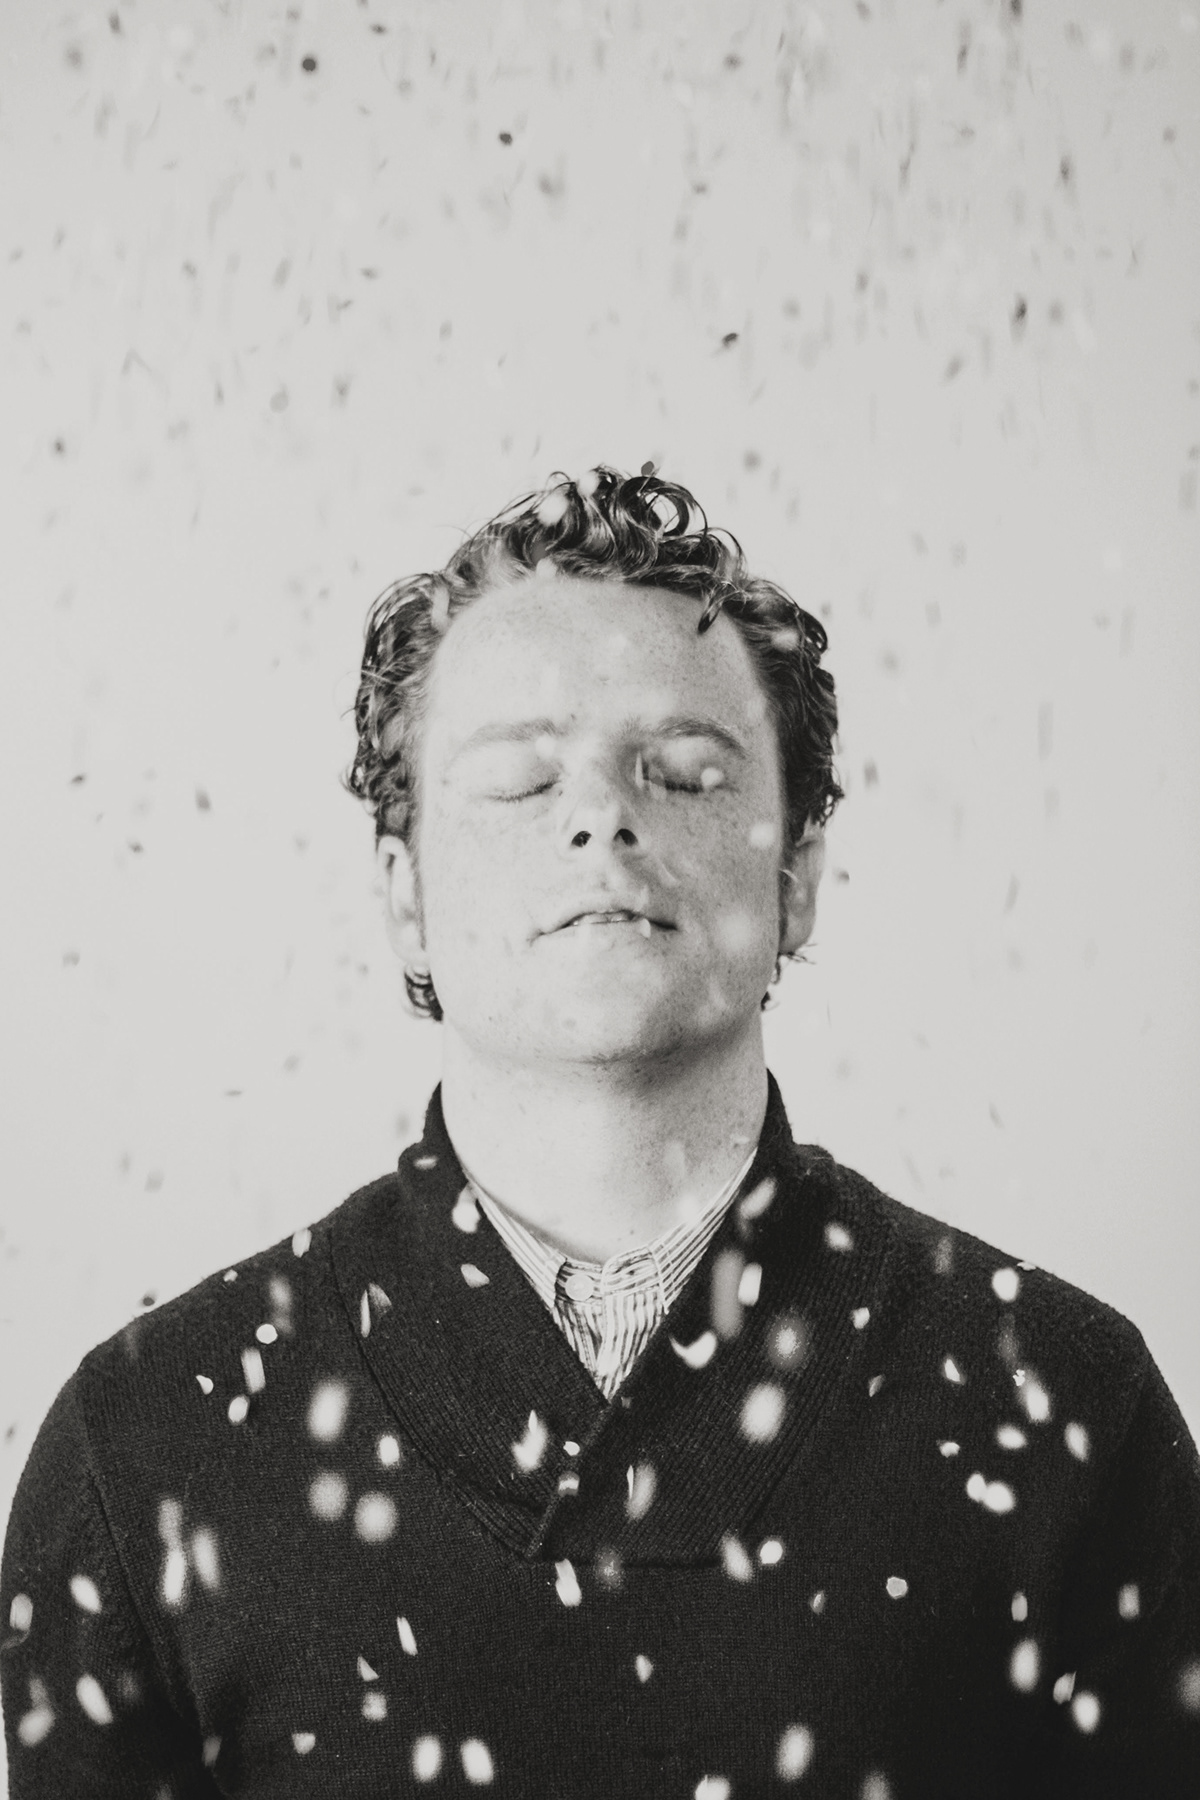 confetti  party  man  ginger  shoot  photoshoot  softbox  color black and white  studio  inside